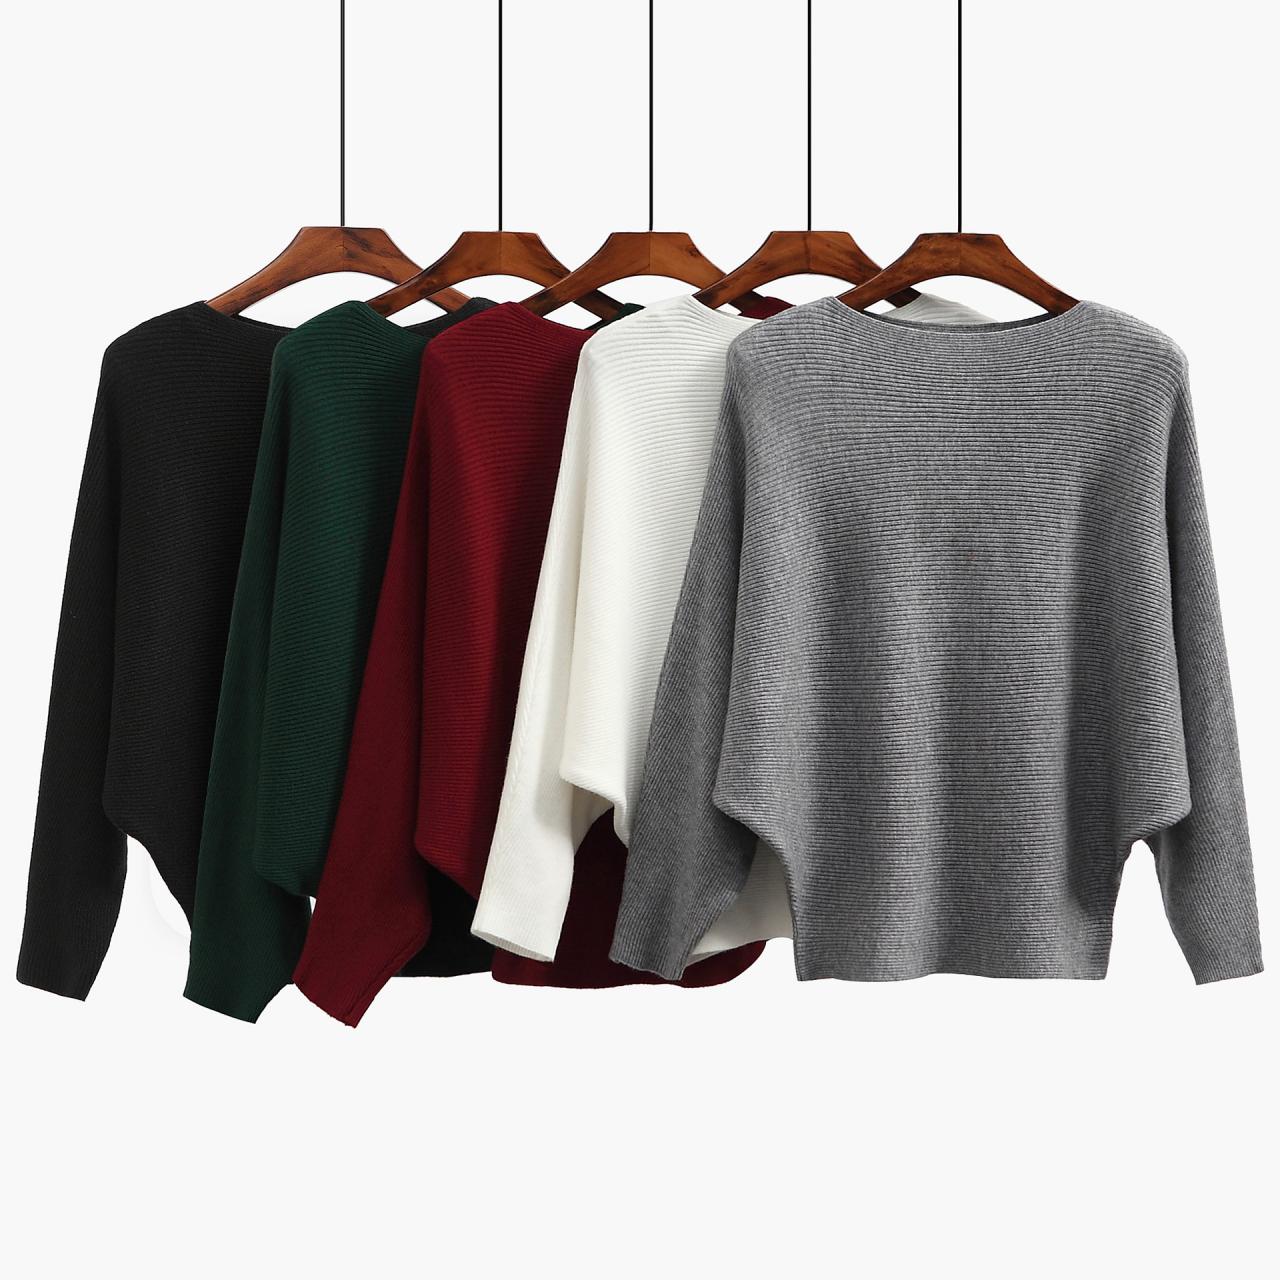 Knitted Bateau Neck Long Bat Sleeves Sweater